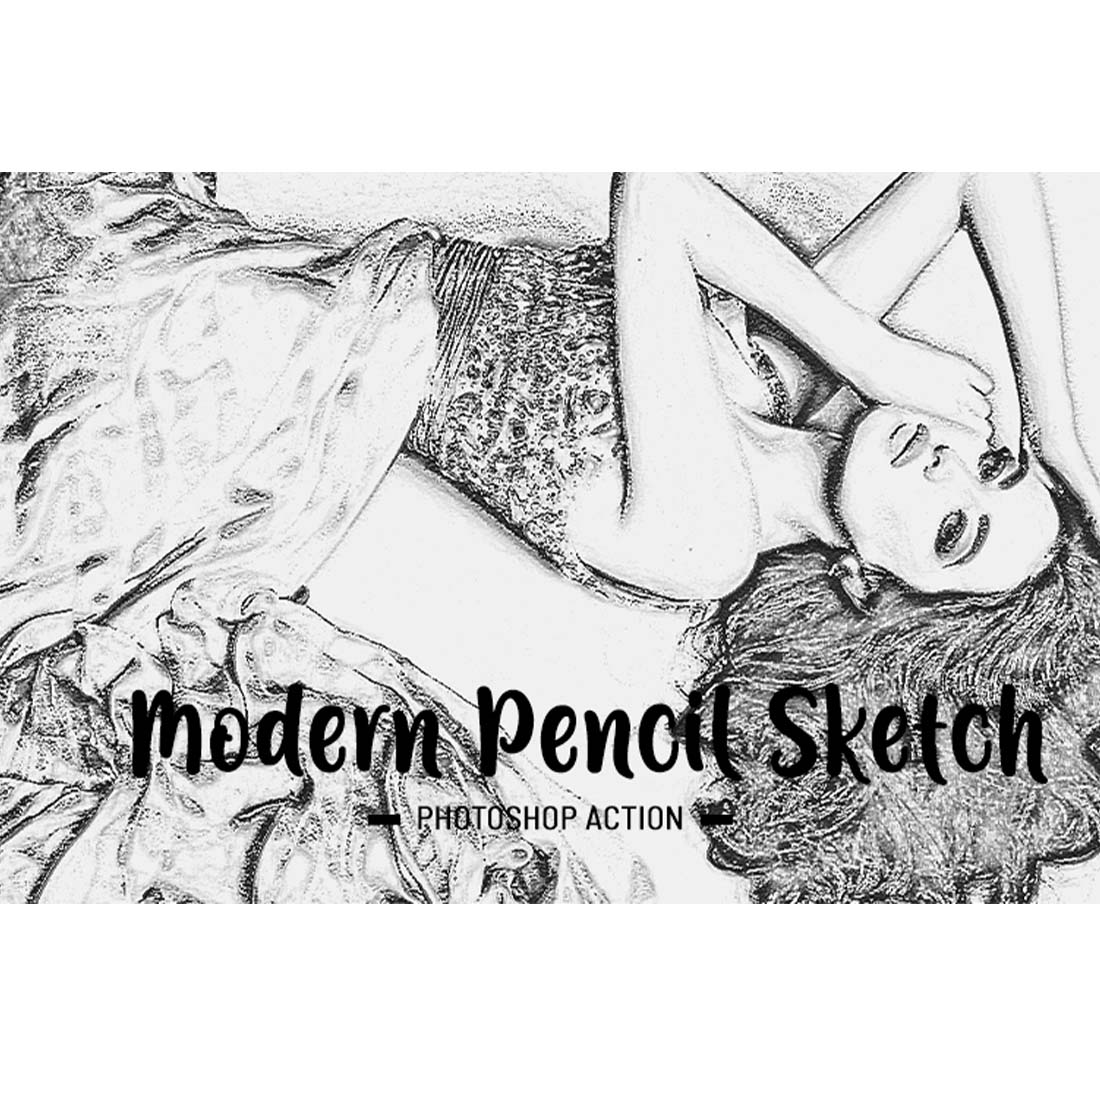 Modern Pencil Sketch Photoshop Action cover image.